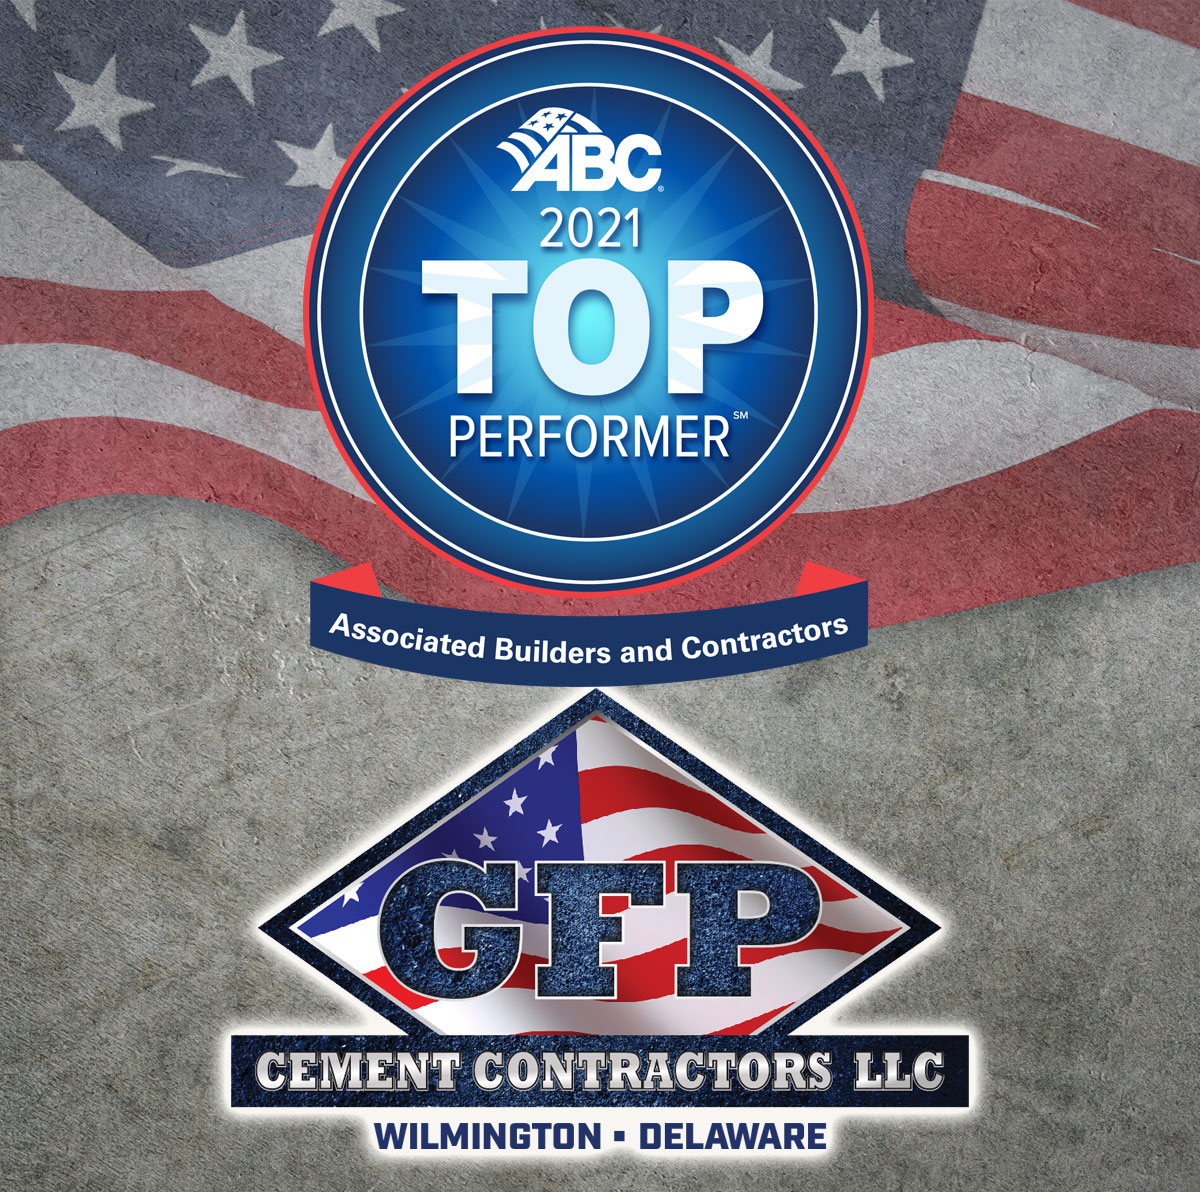 GFP Cement Contractors, LLC.  Named a Top-performing U.S. Construction Company by ABC